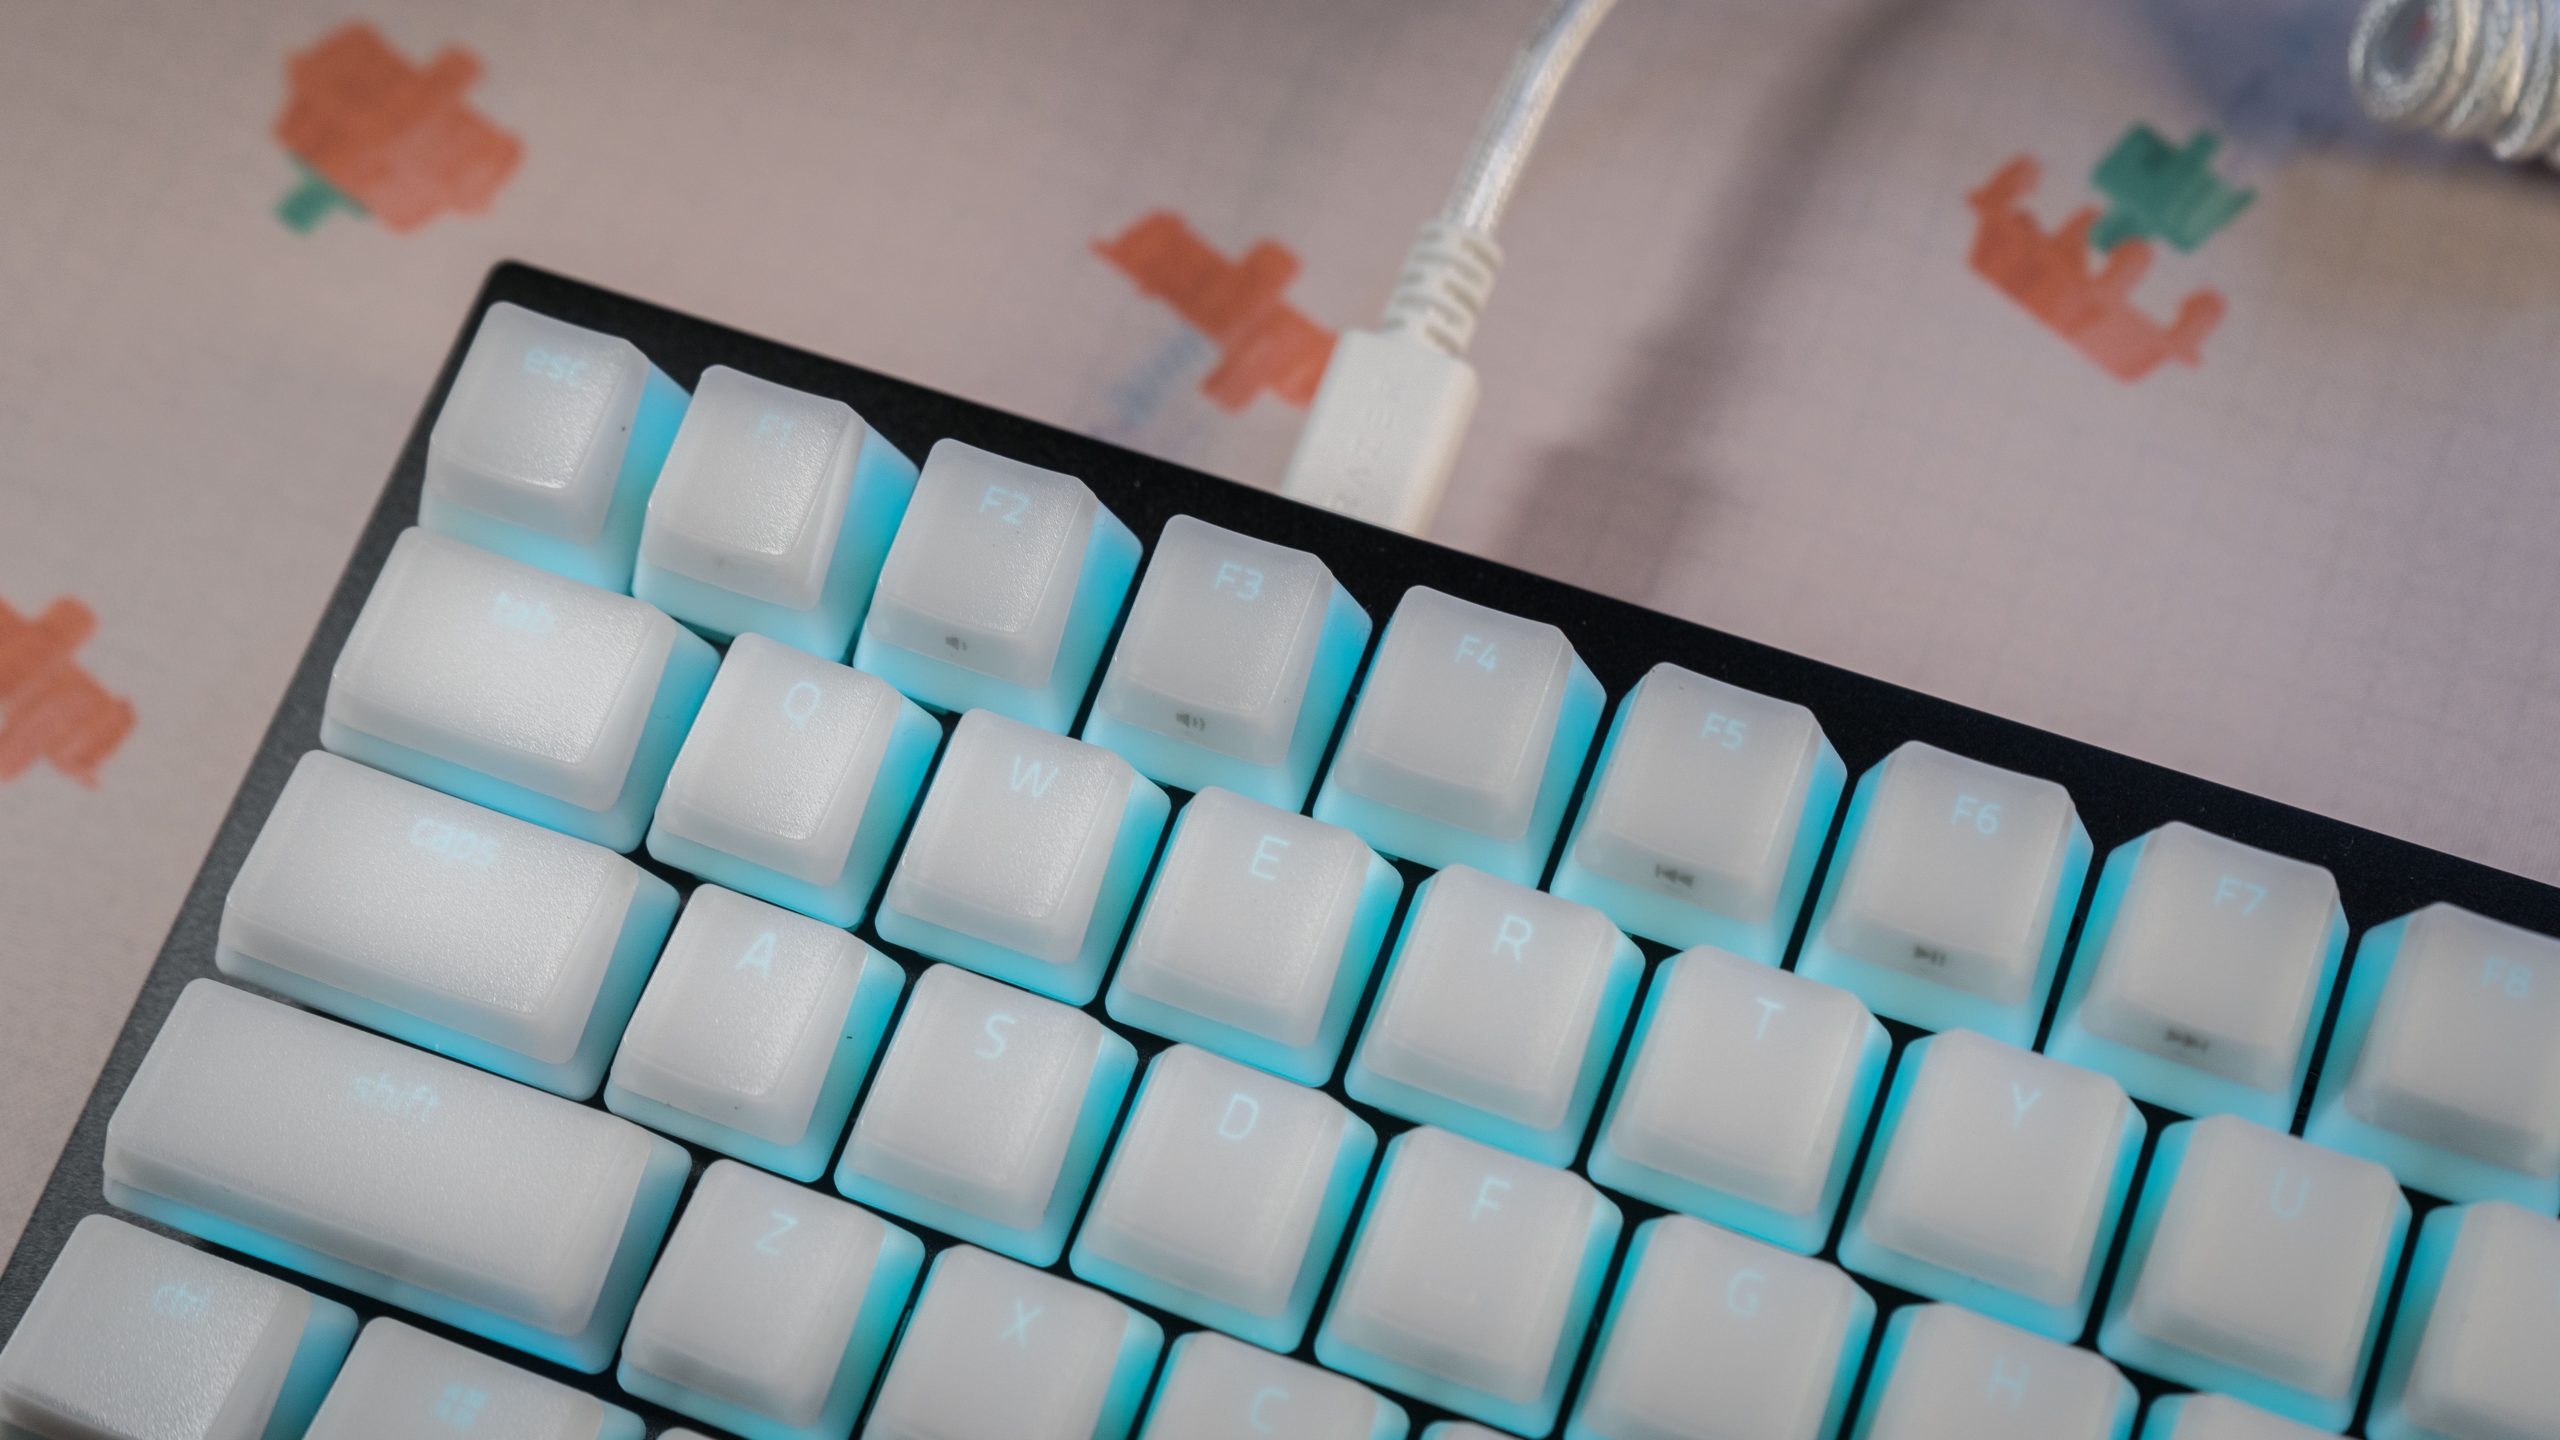 The Phantom keycaps get their look with LED light shining through.  (Photo: Florence Ion / Gizmodo)